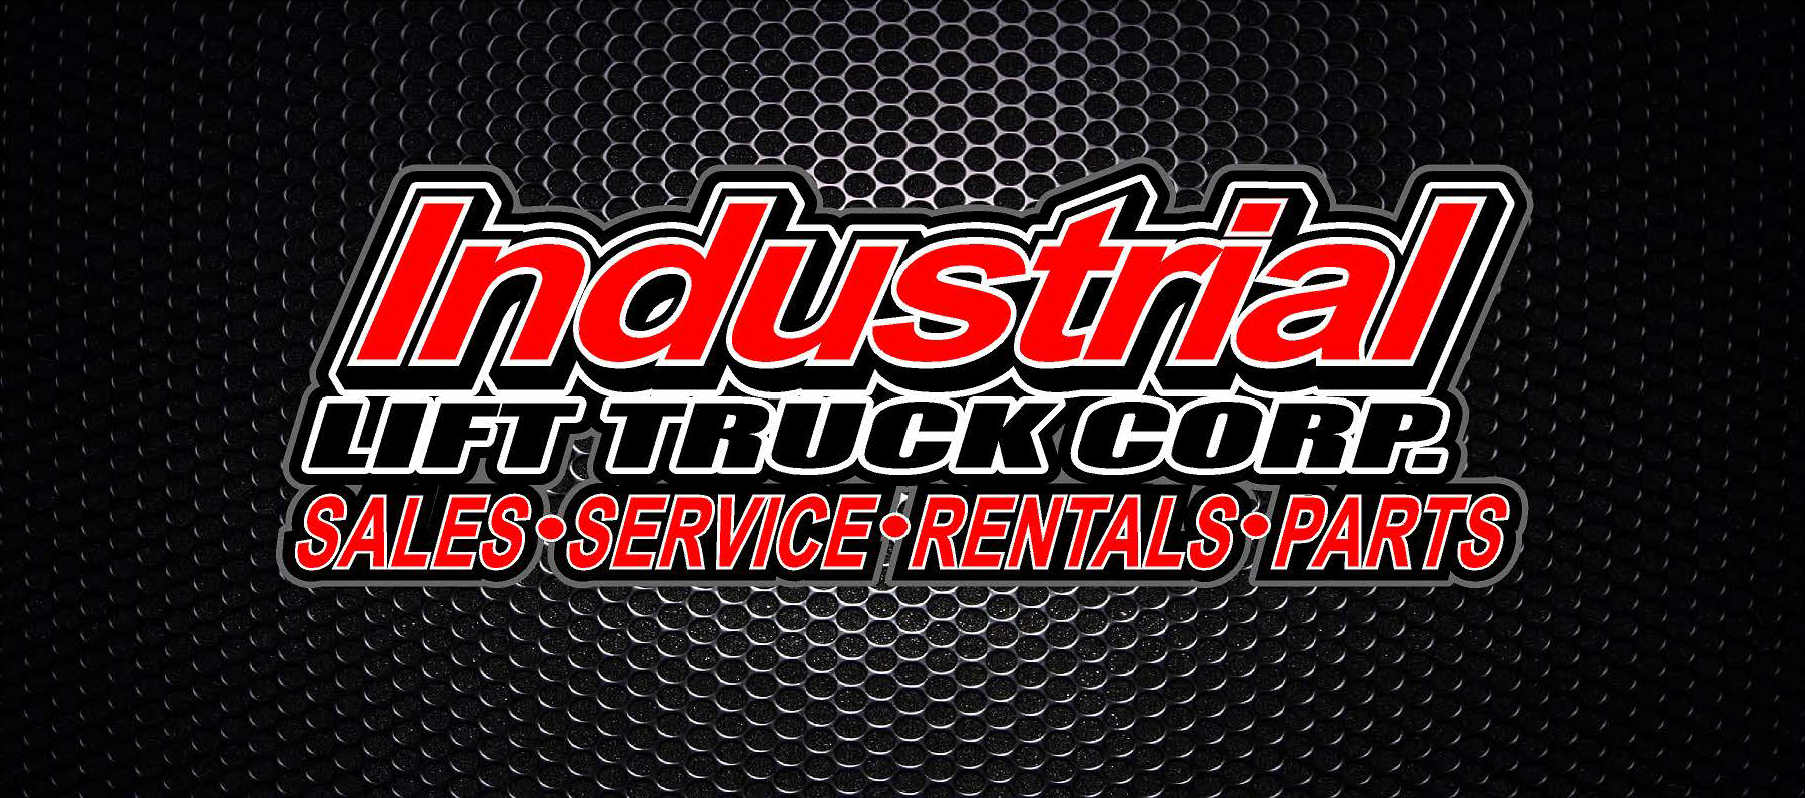 Industrial Lift Truck Corp.